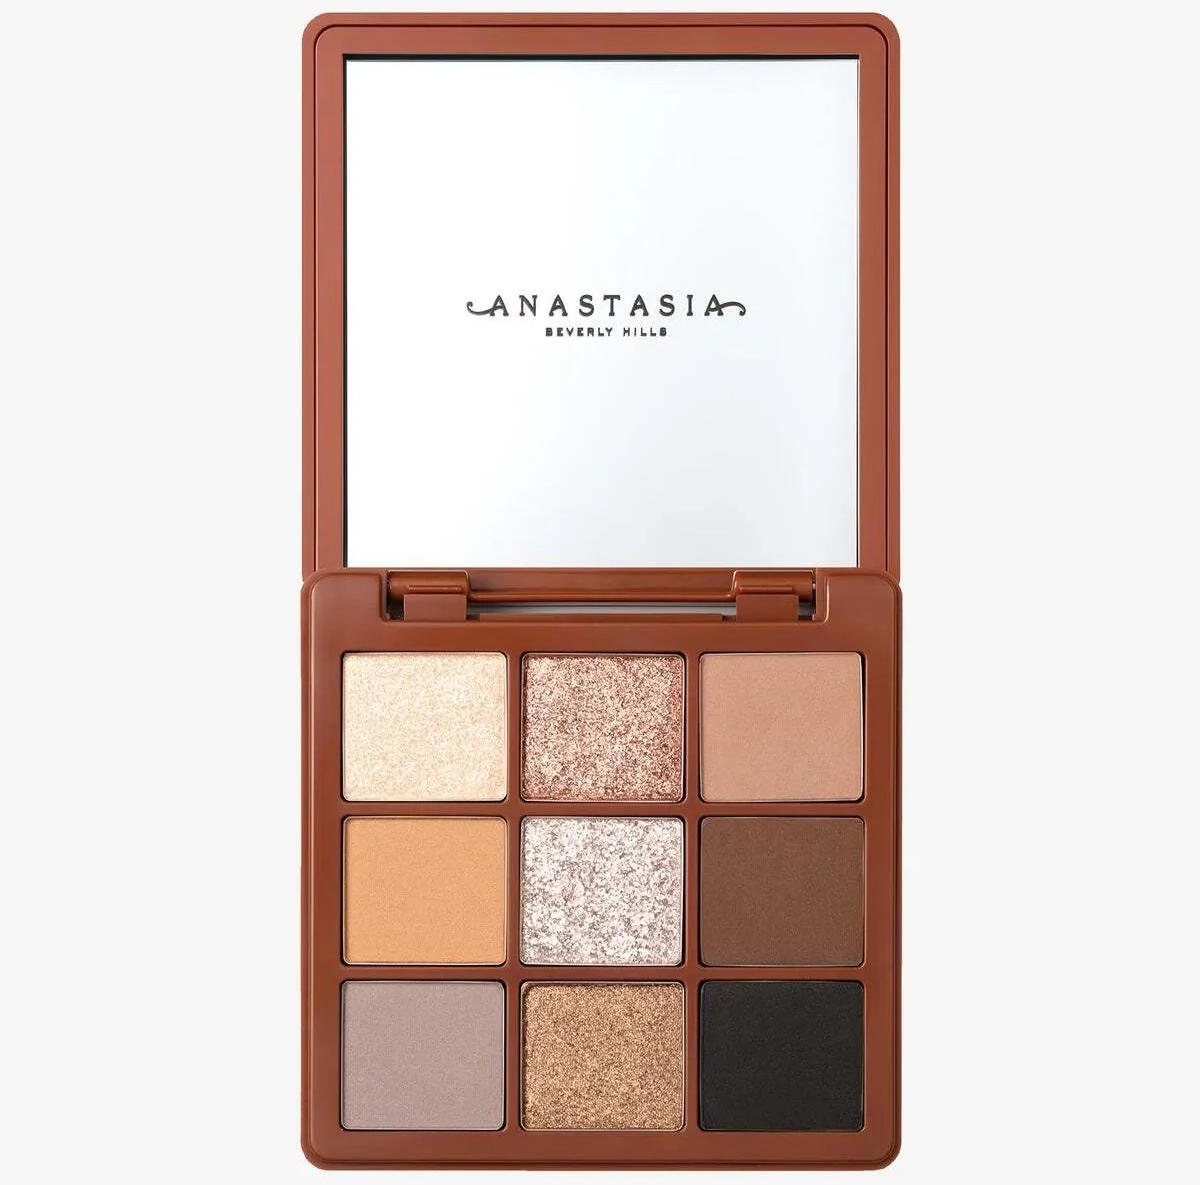 Anastasia Beverly Hills palette mini Sultry